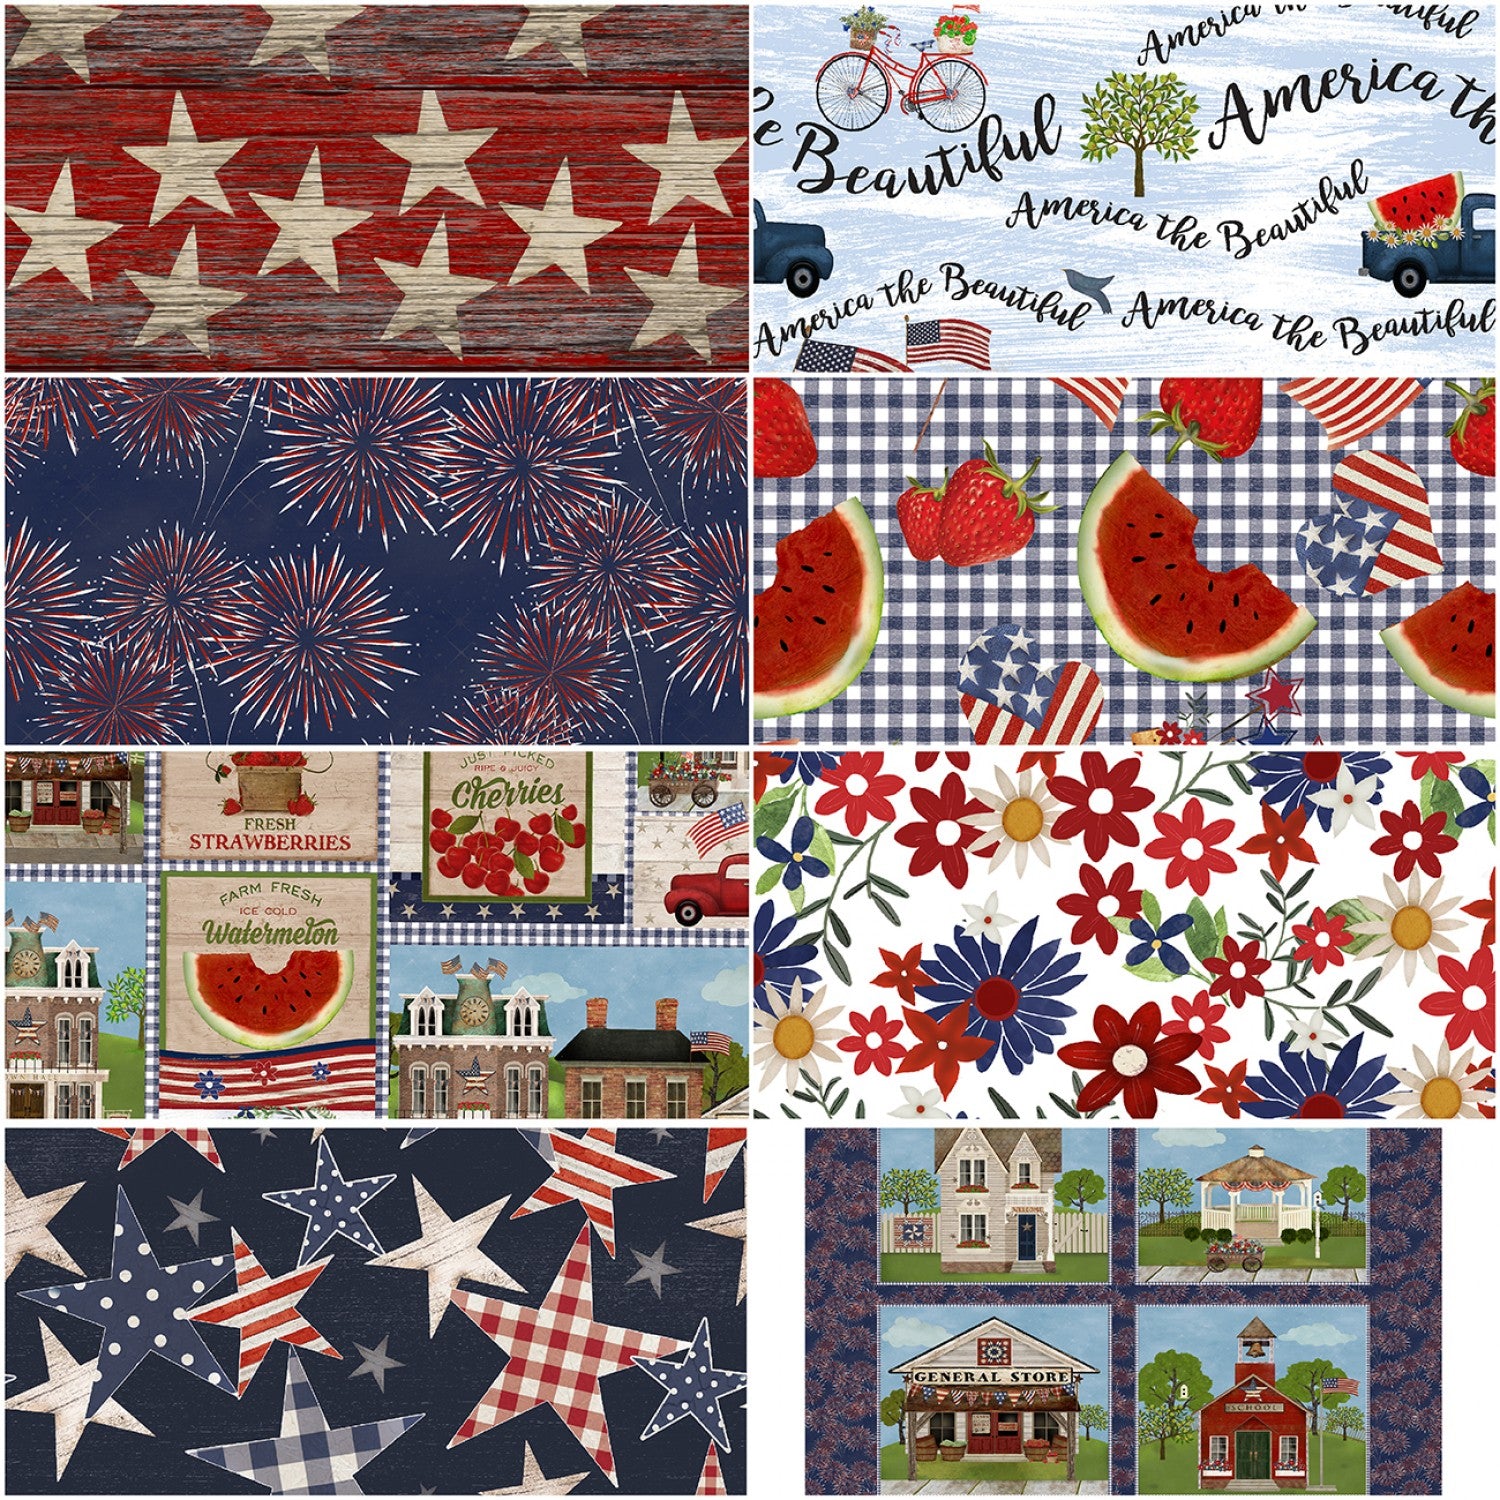 Sweet Land of Liberty - Allover Floral White by Beth Albert